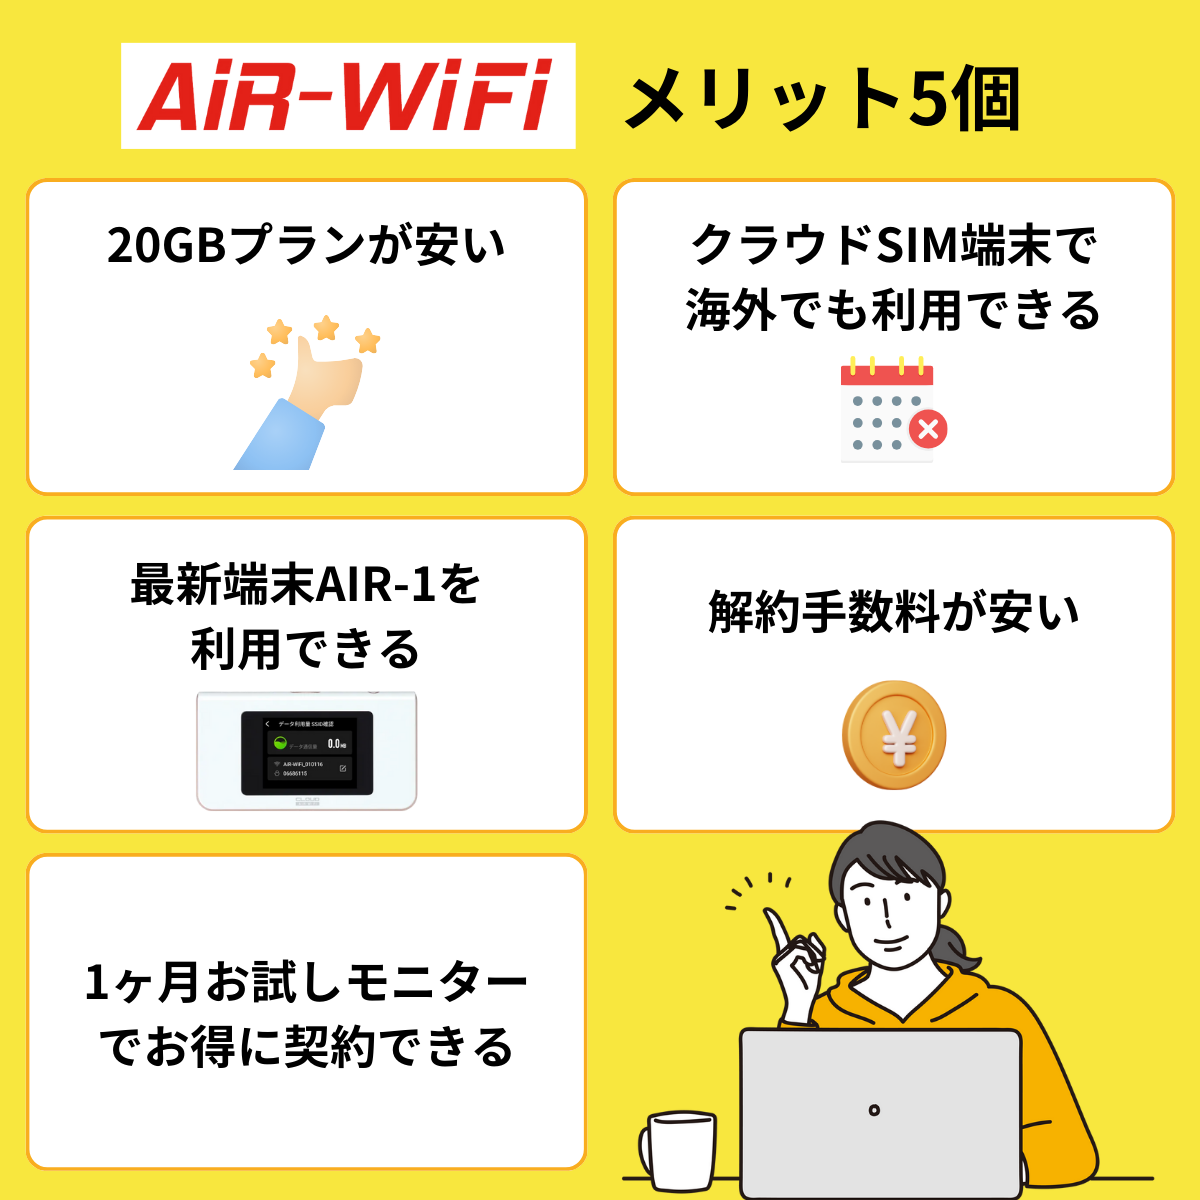 Air-WiFiのメリット